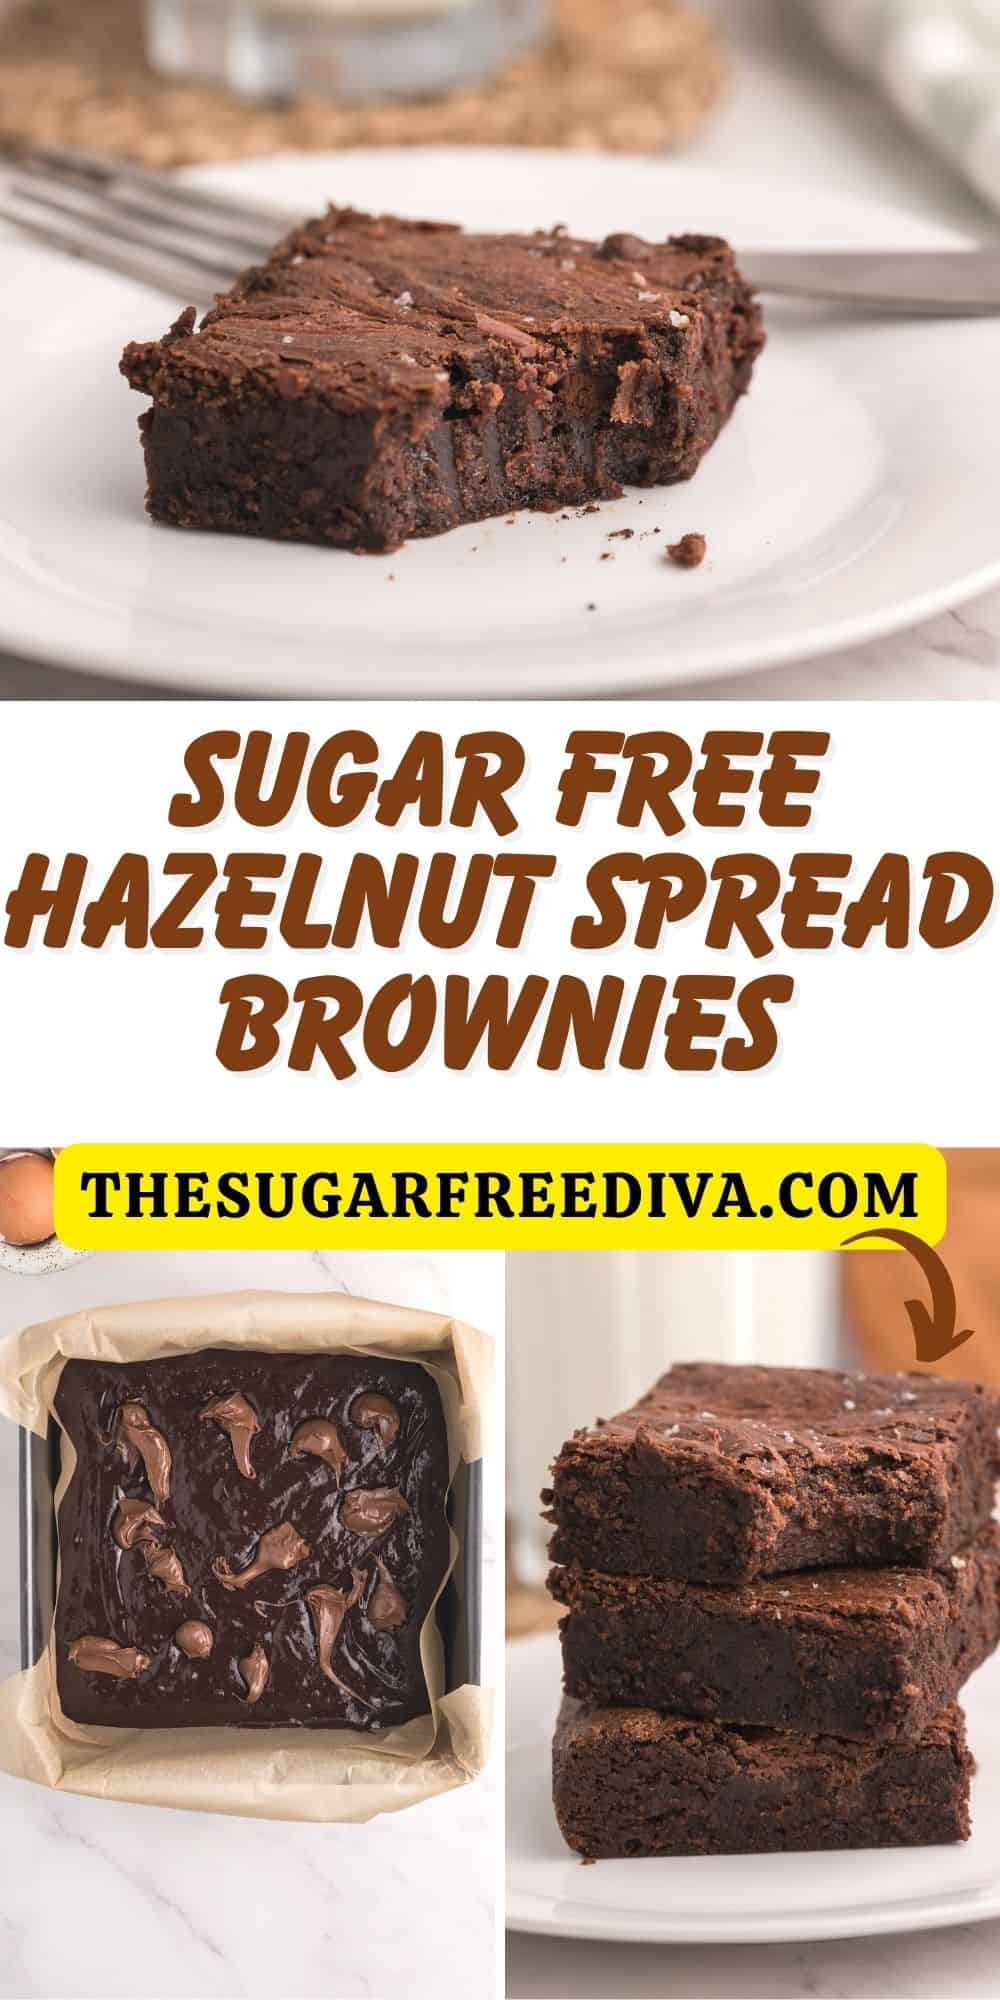 Sugar Free Hazelnut Spread Brownies, a delicious Nutella inspired dessert recipe  for fudgy nutty bars with no added sugar. Low carb option.